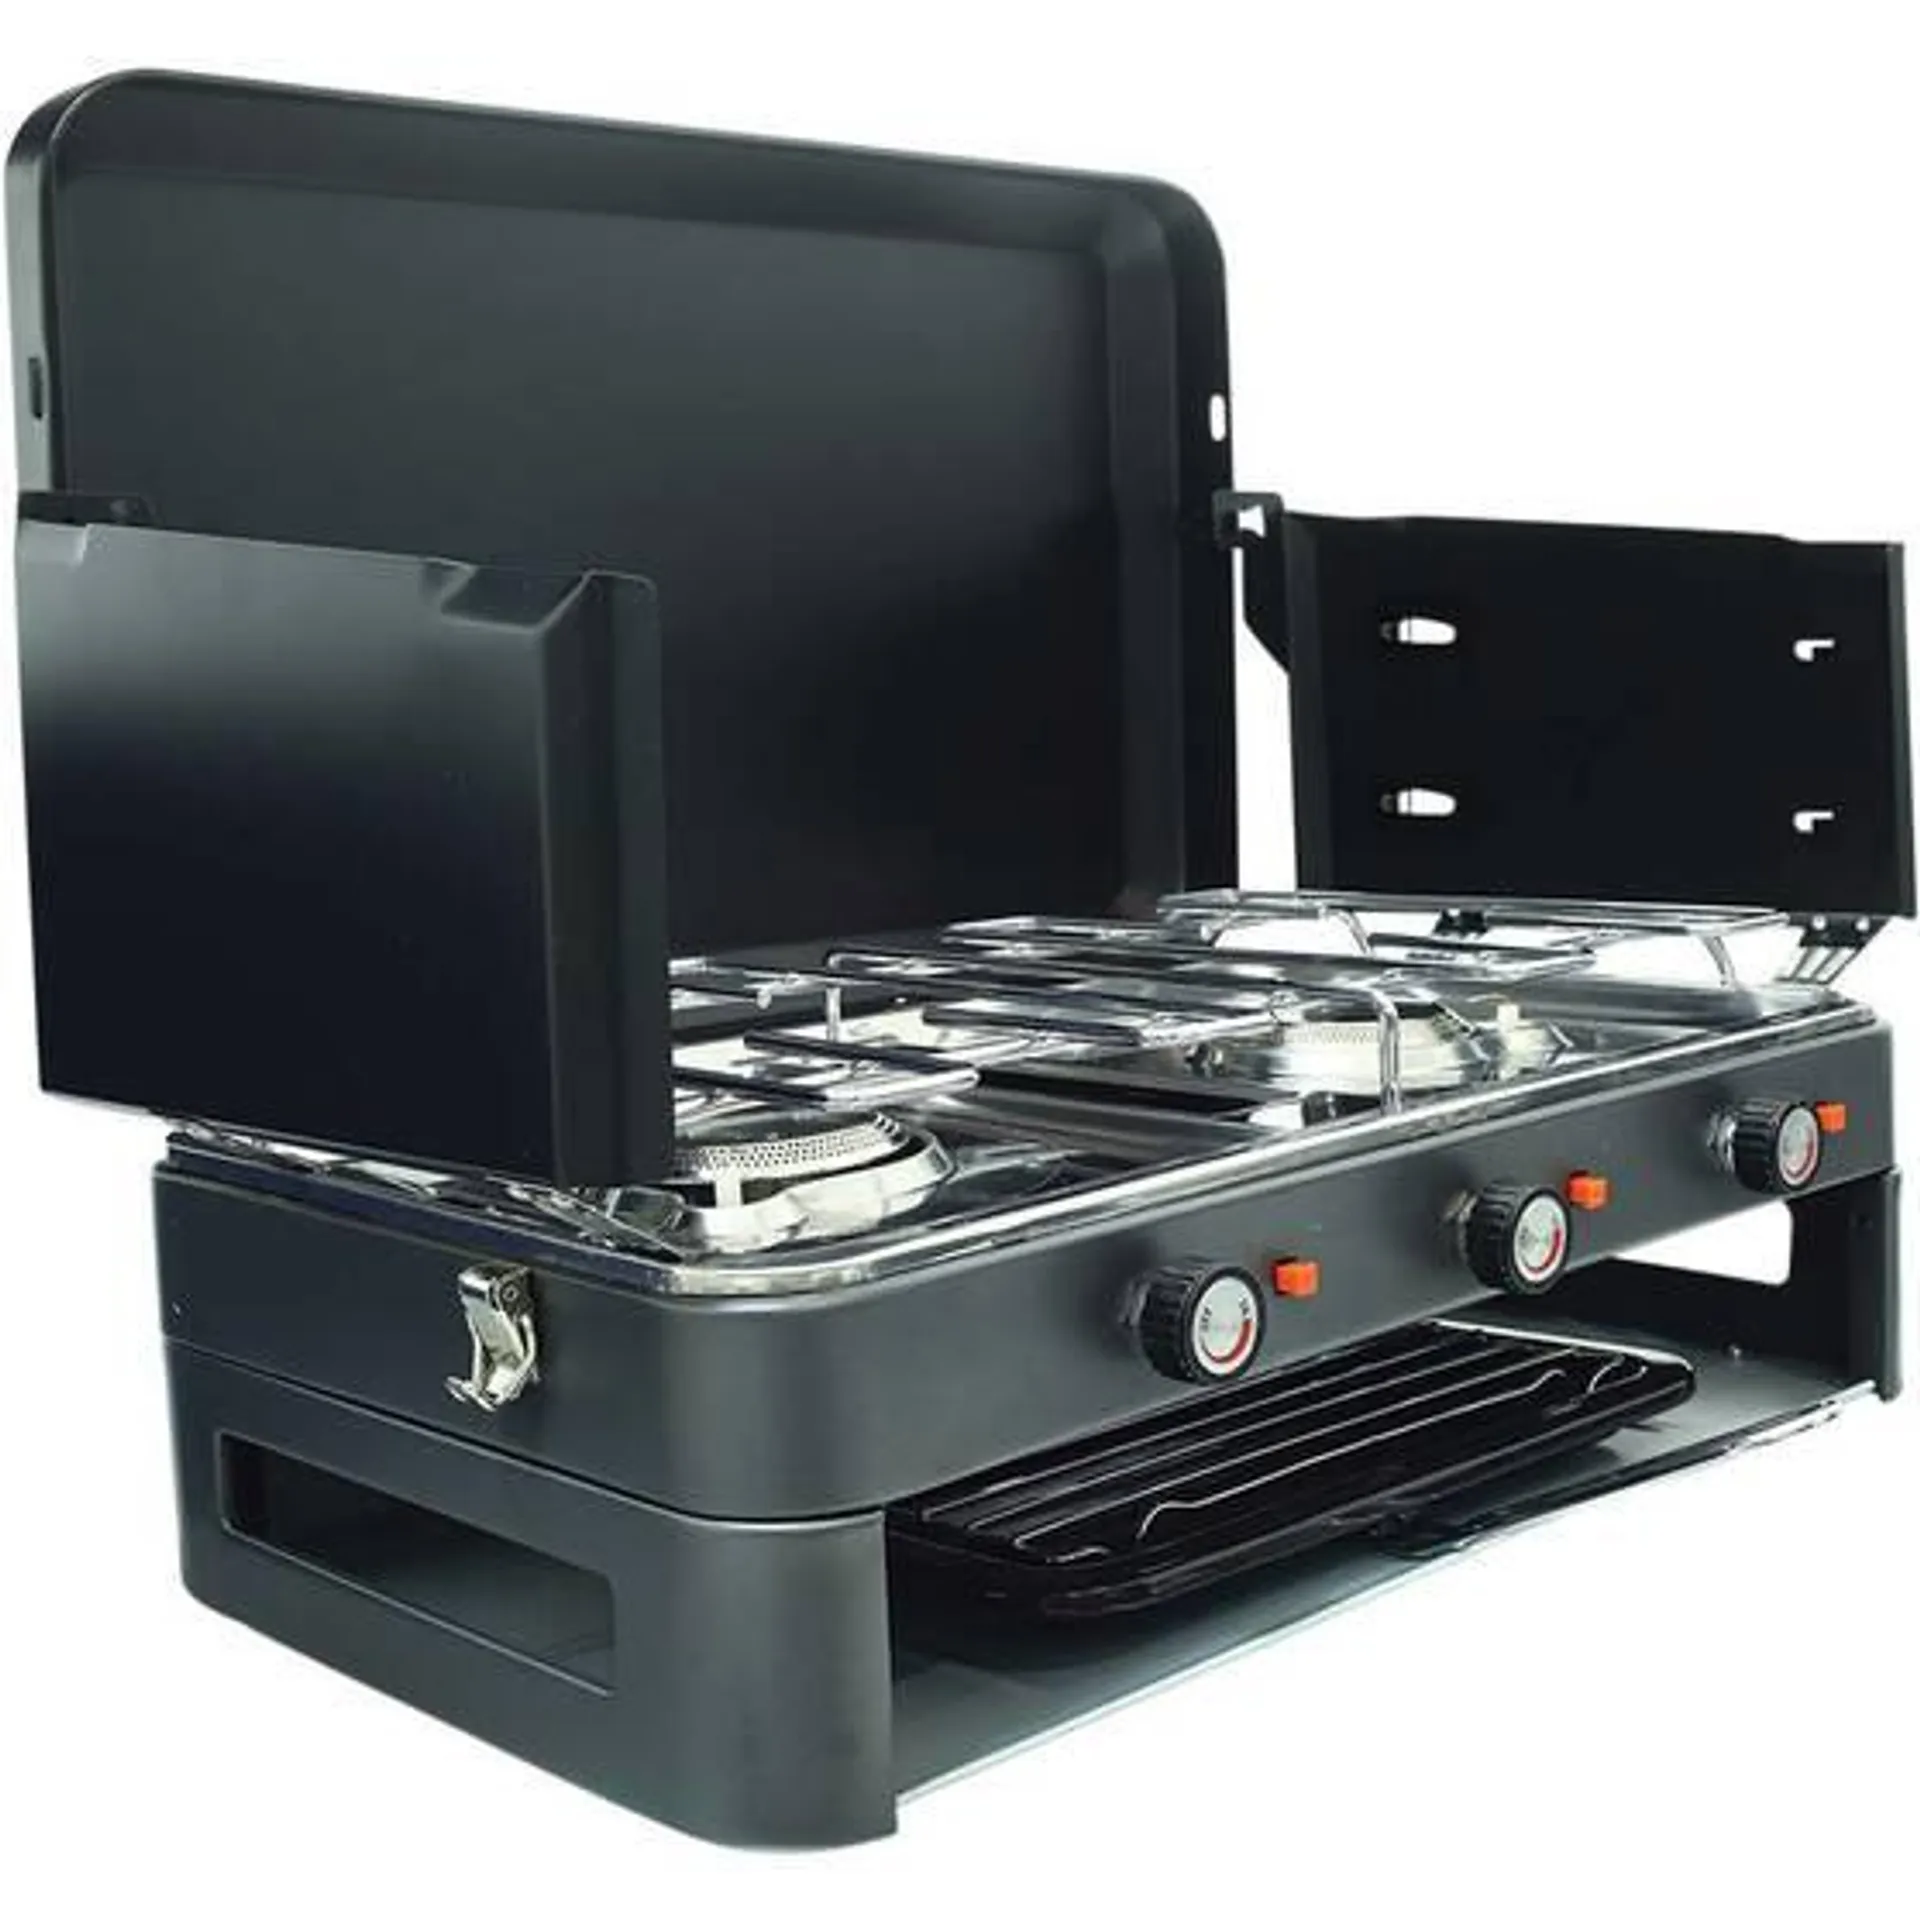 Zempire Deluxe 2 Burner Stove and Grill